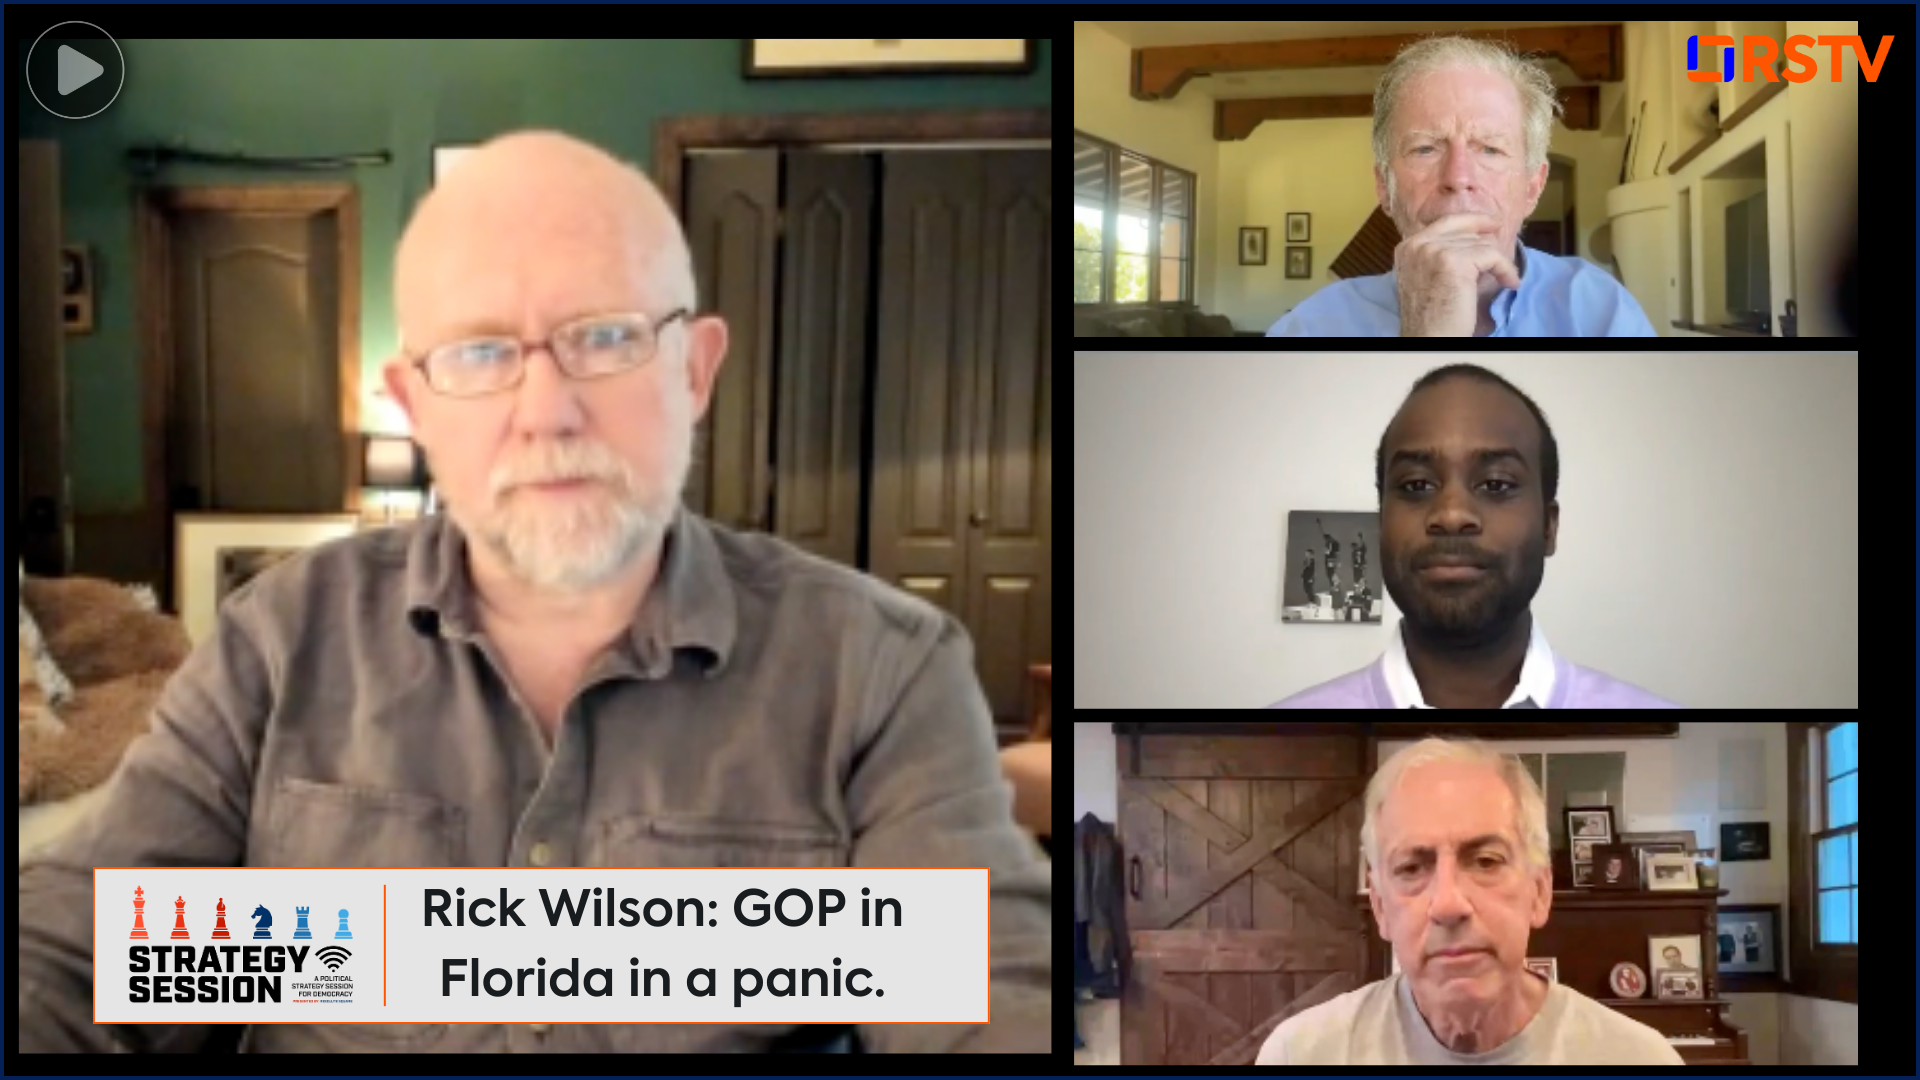 Rick Wilson On GOP In Florida: "Can we take all the poison pills at once?"